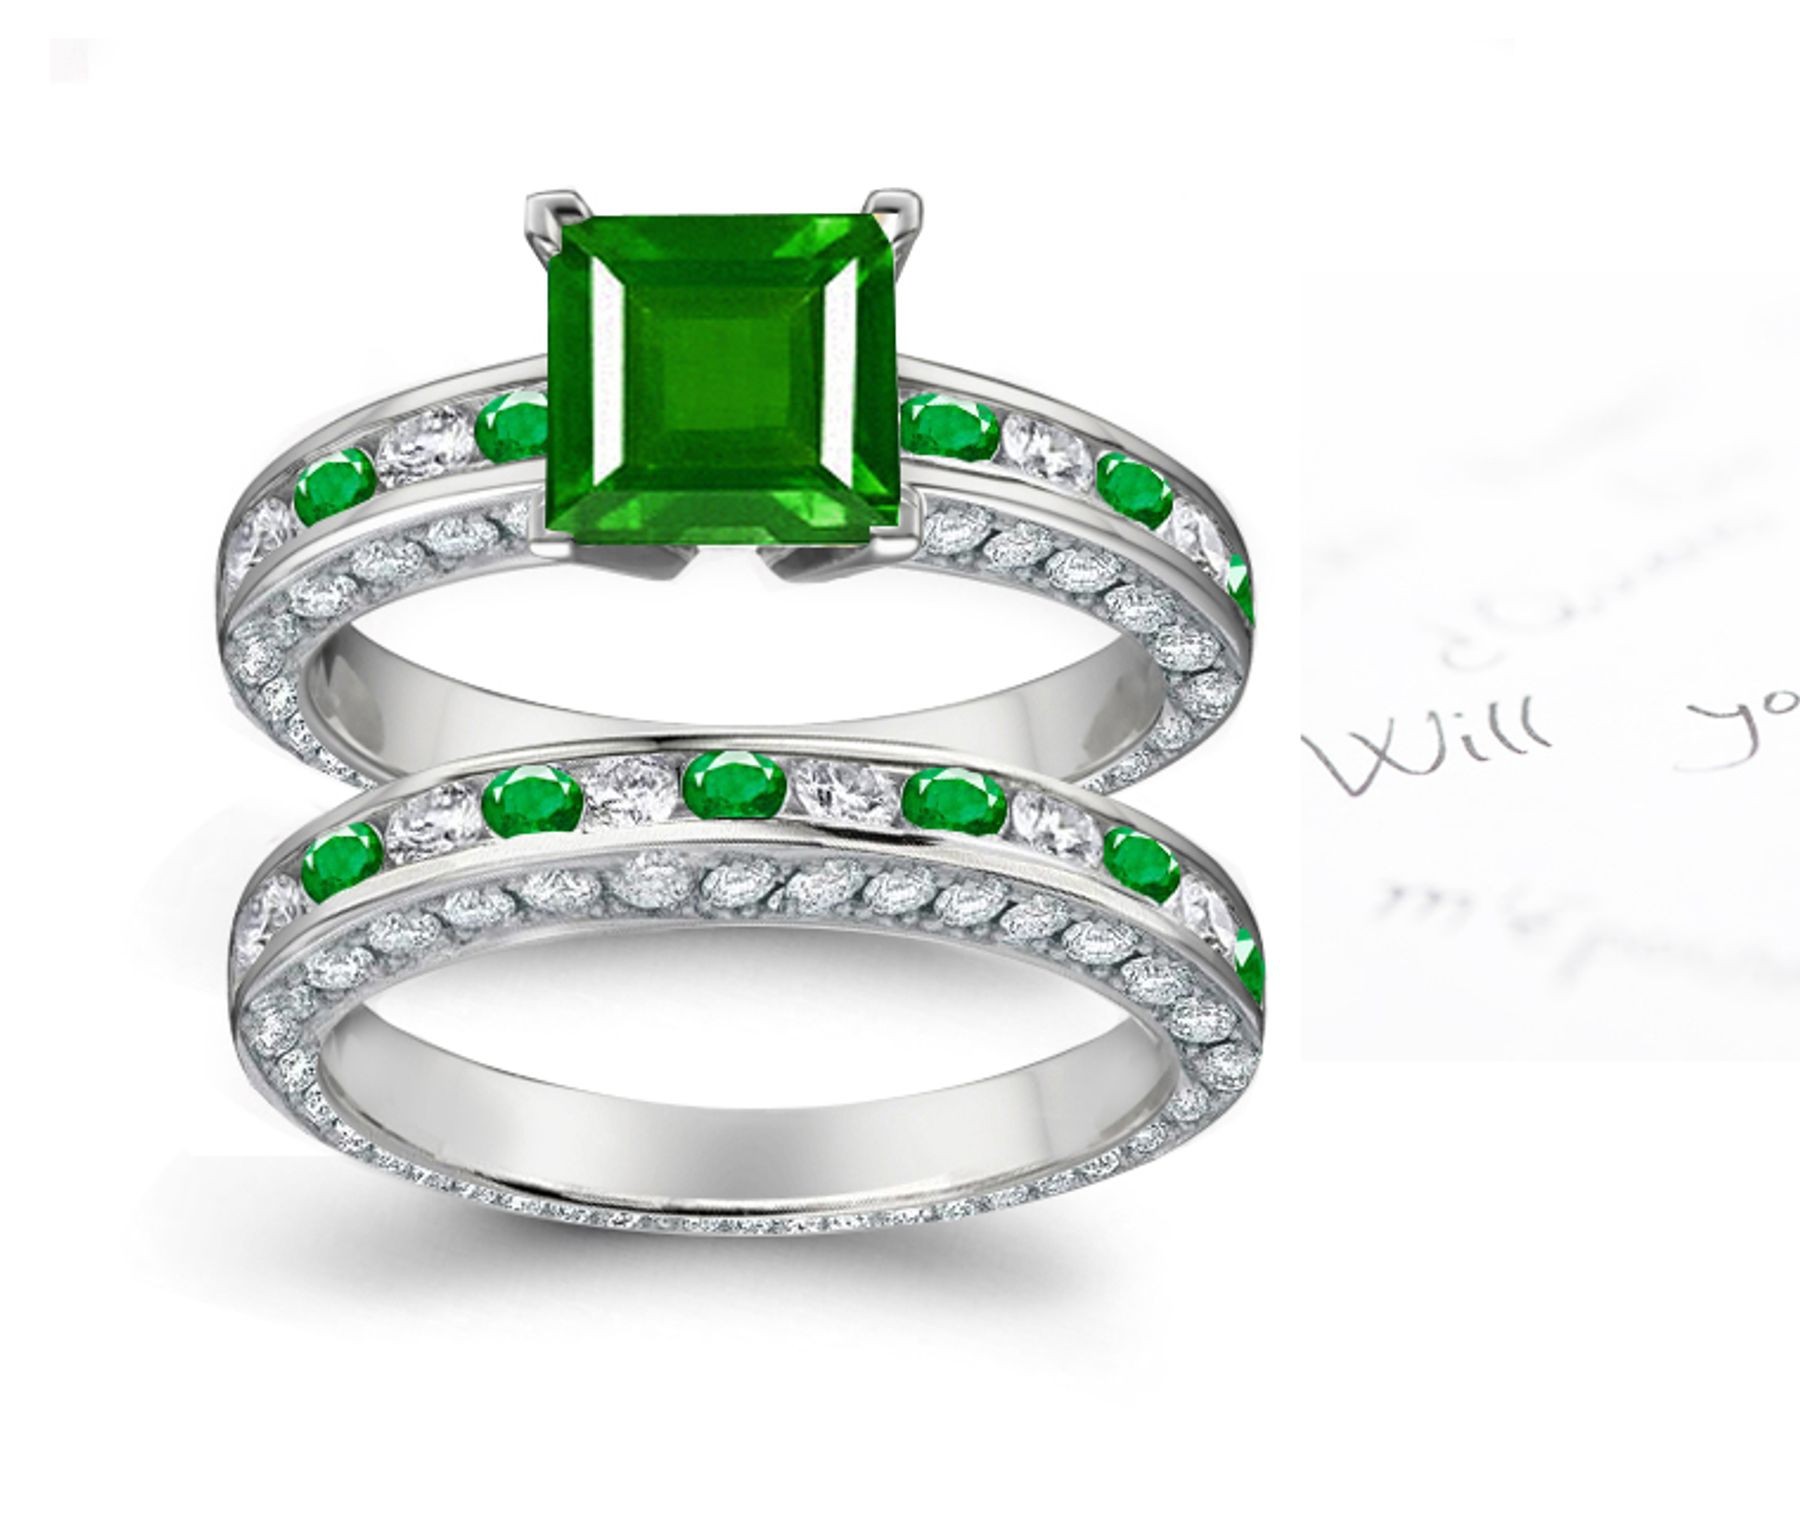 A Varying Collection: Positive Touching Gold & Square Gorgeous Emerald Diamond Halo Ring & Diamond Emerald Halo Band Available Women